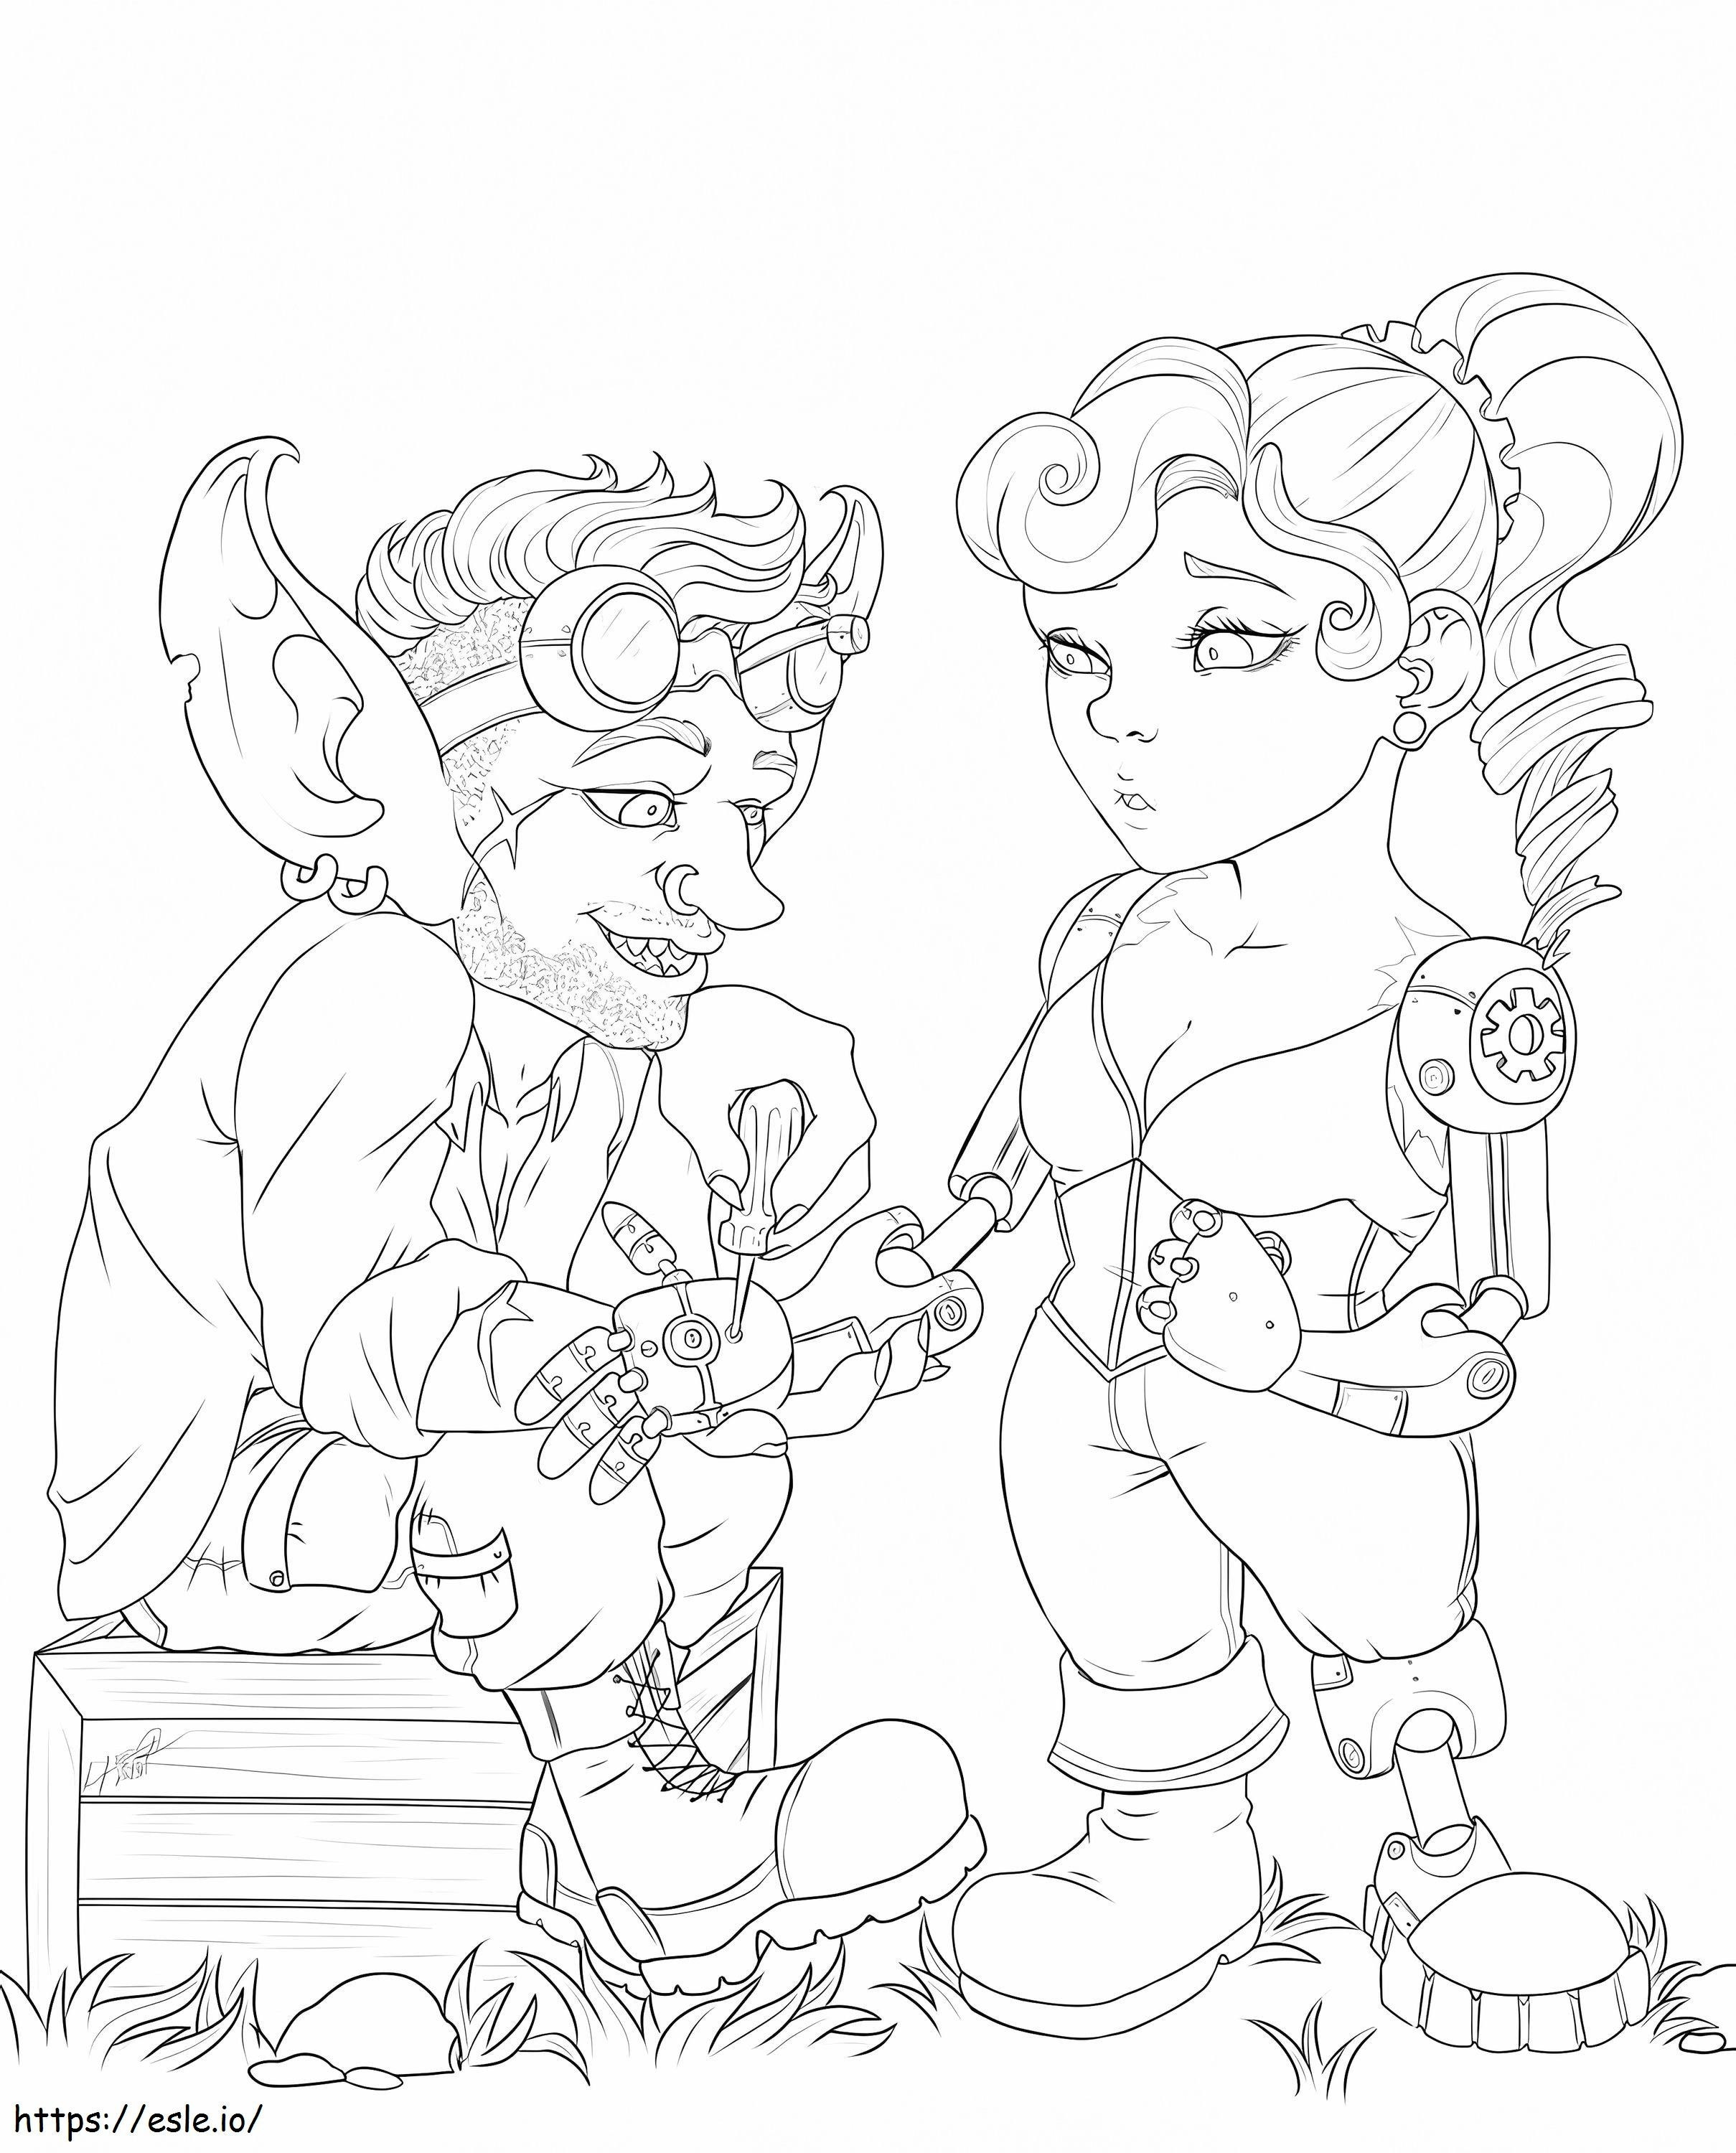 Mechagnome And Goblin coloring page